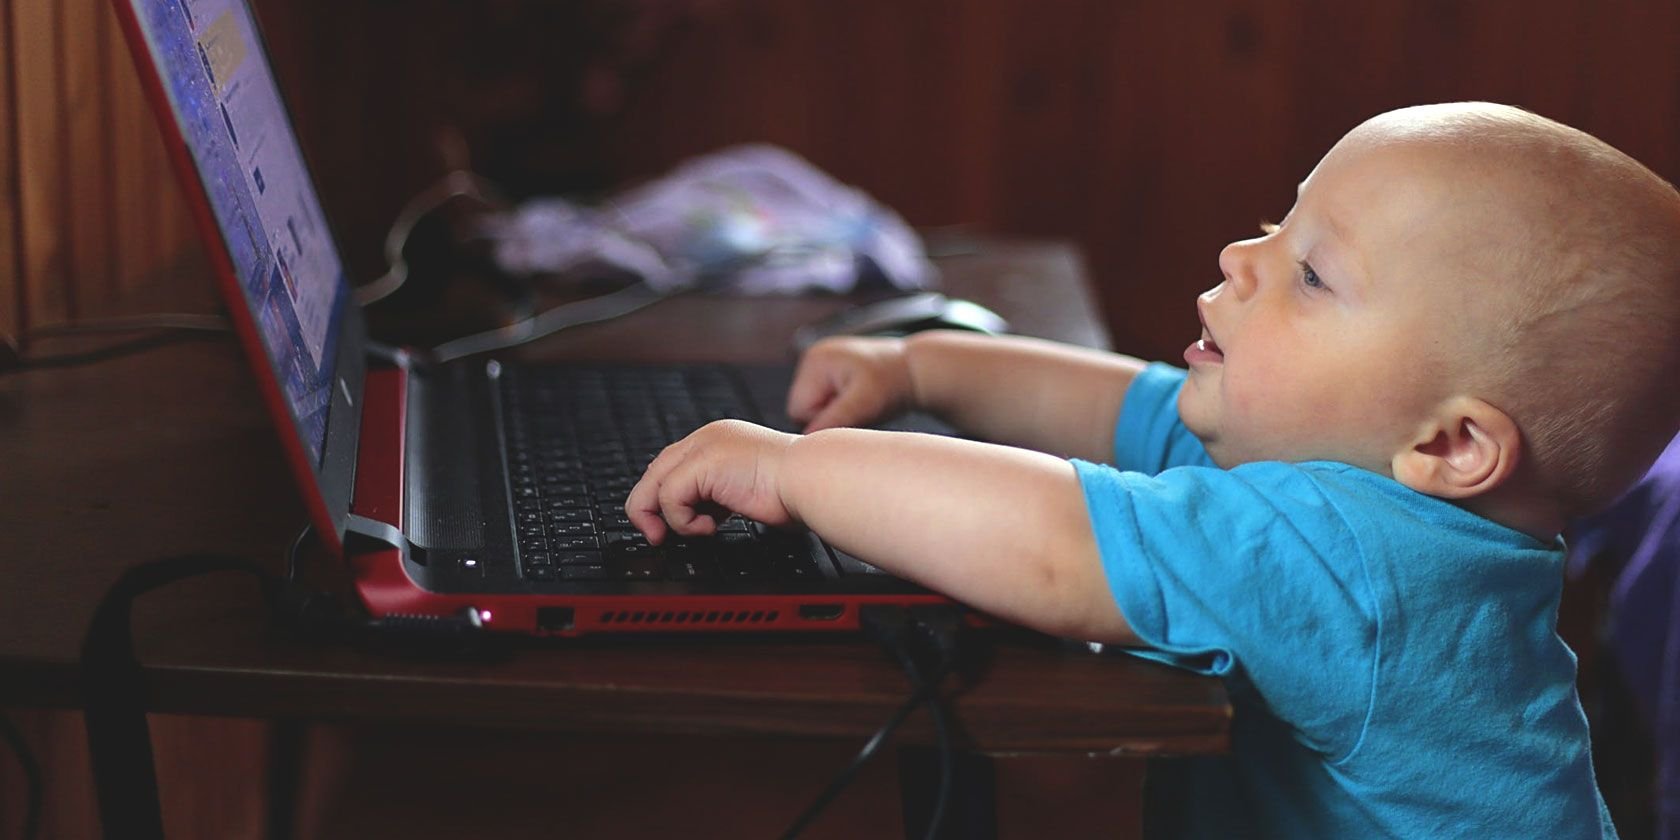 The 7 Best Laptops for Kids That Are Cheap and Rugged